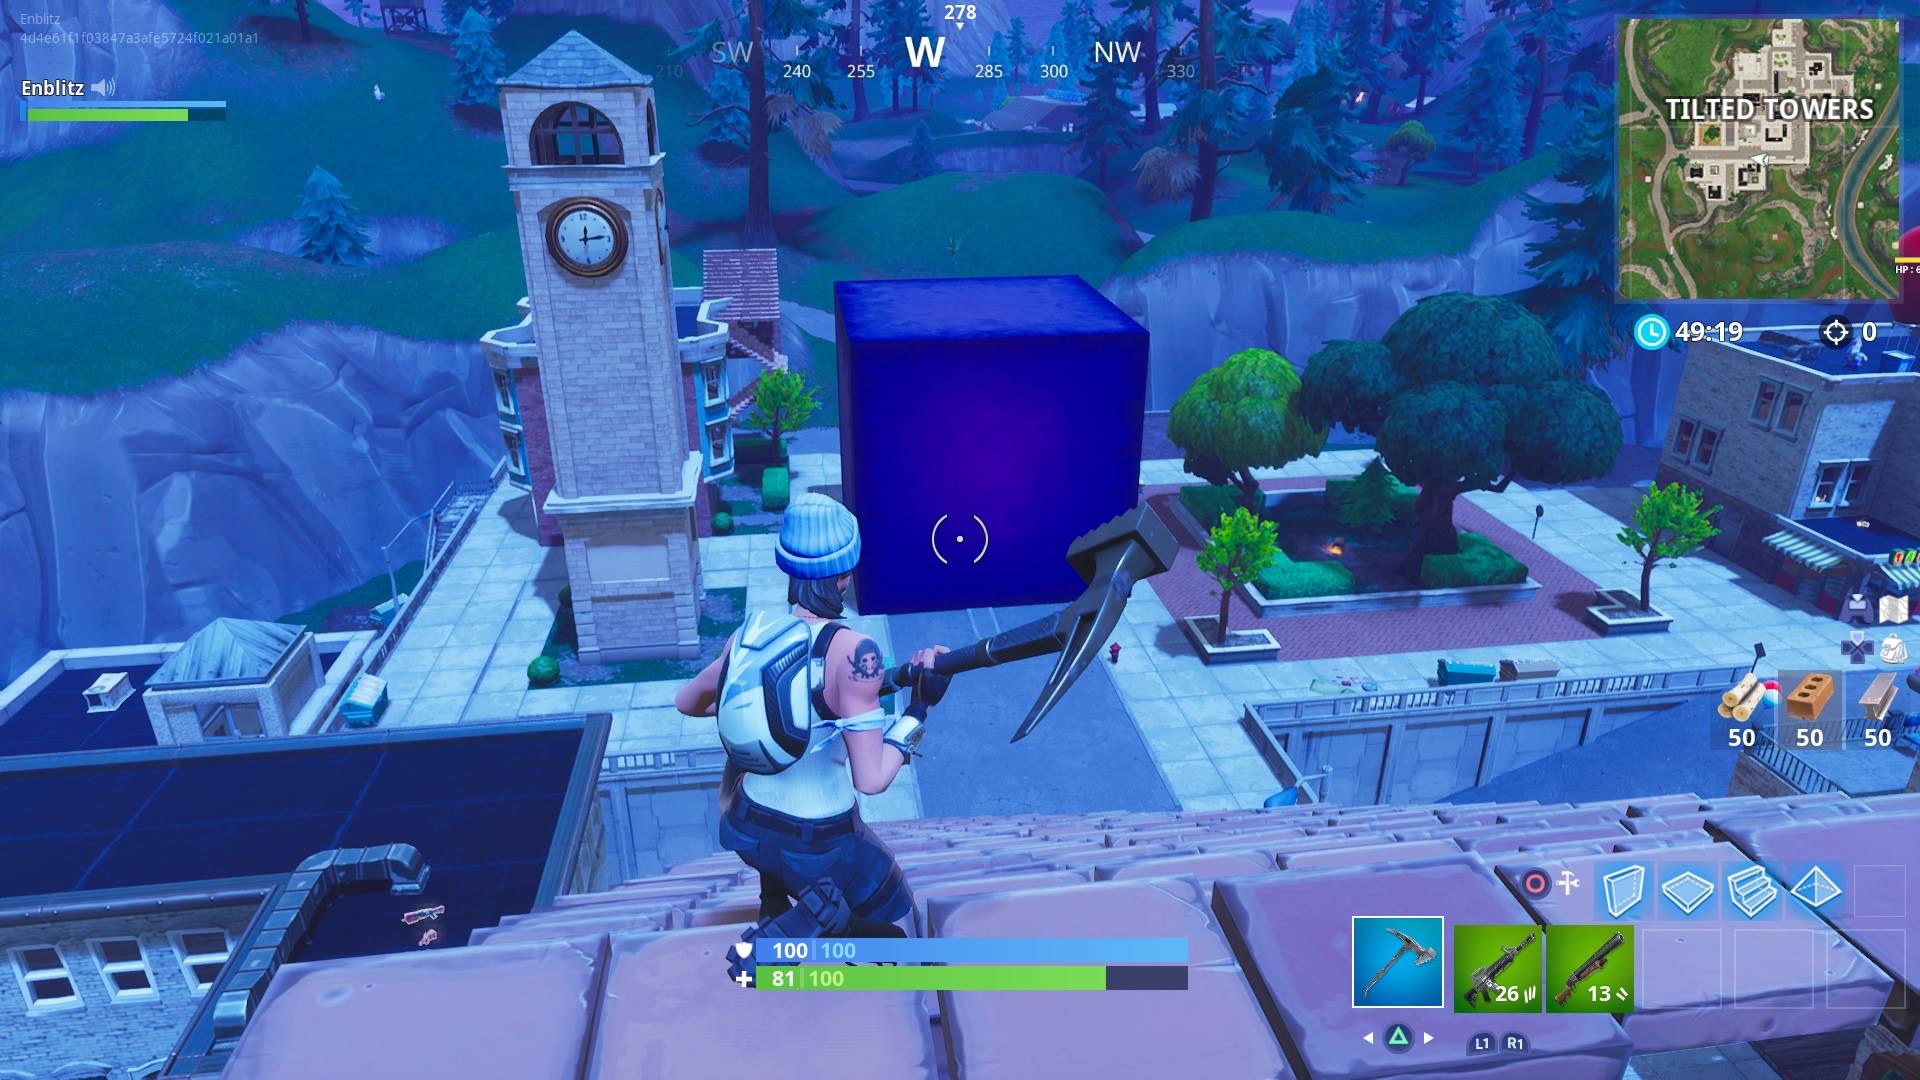 FORTNITE CUBE WATCH: The cube has entered Tilted Towers ...